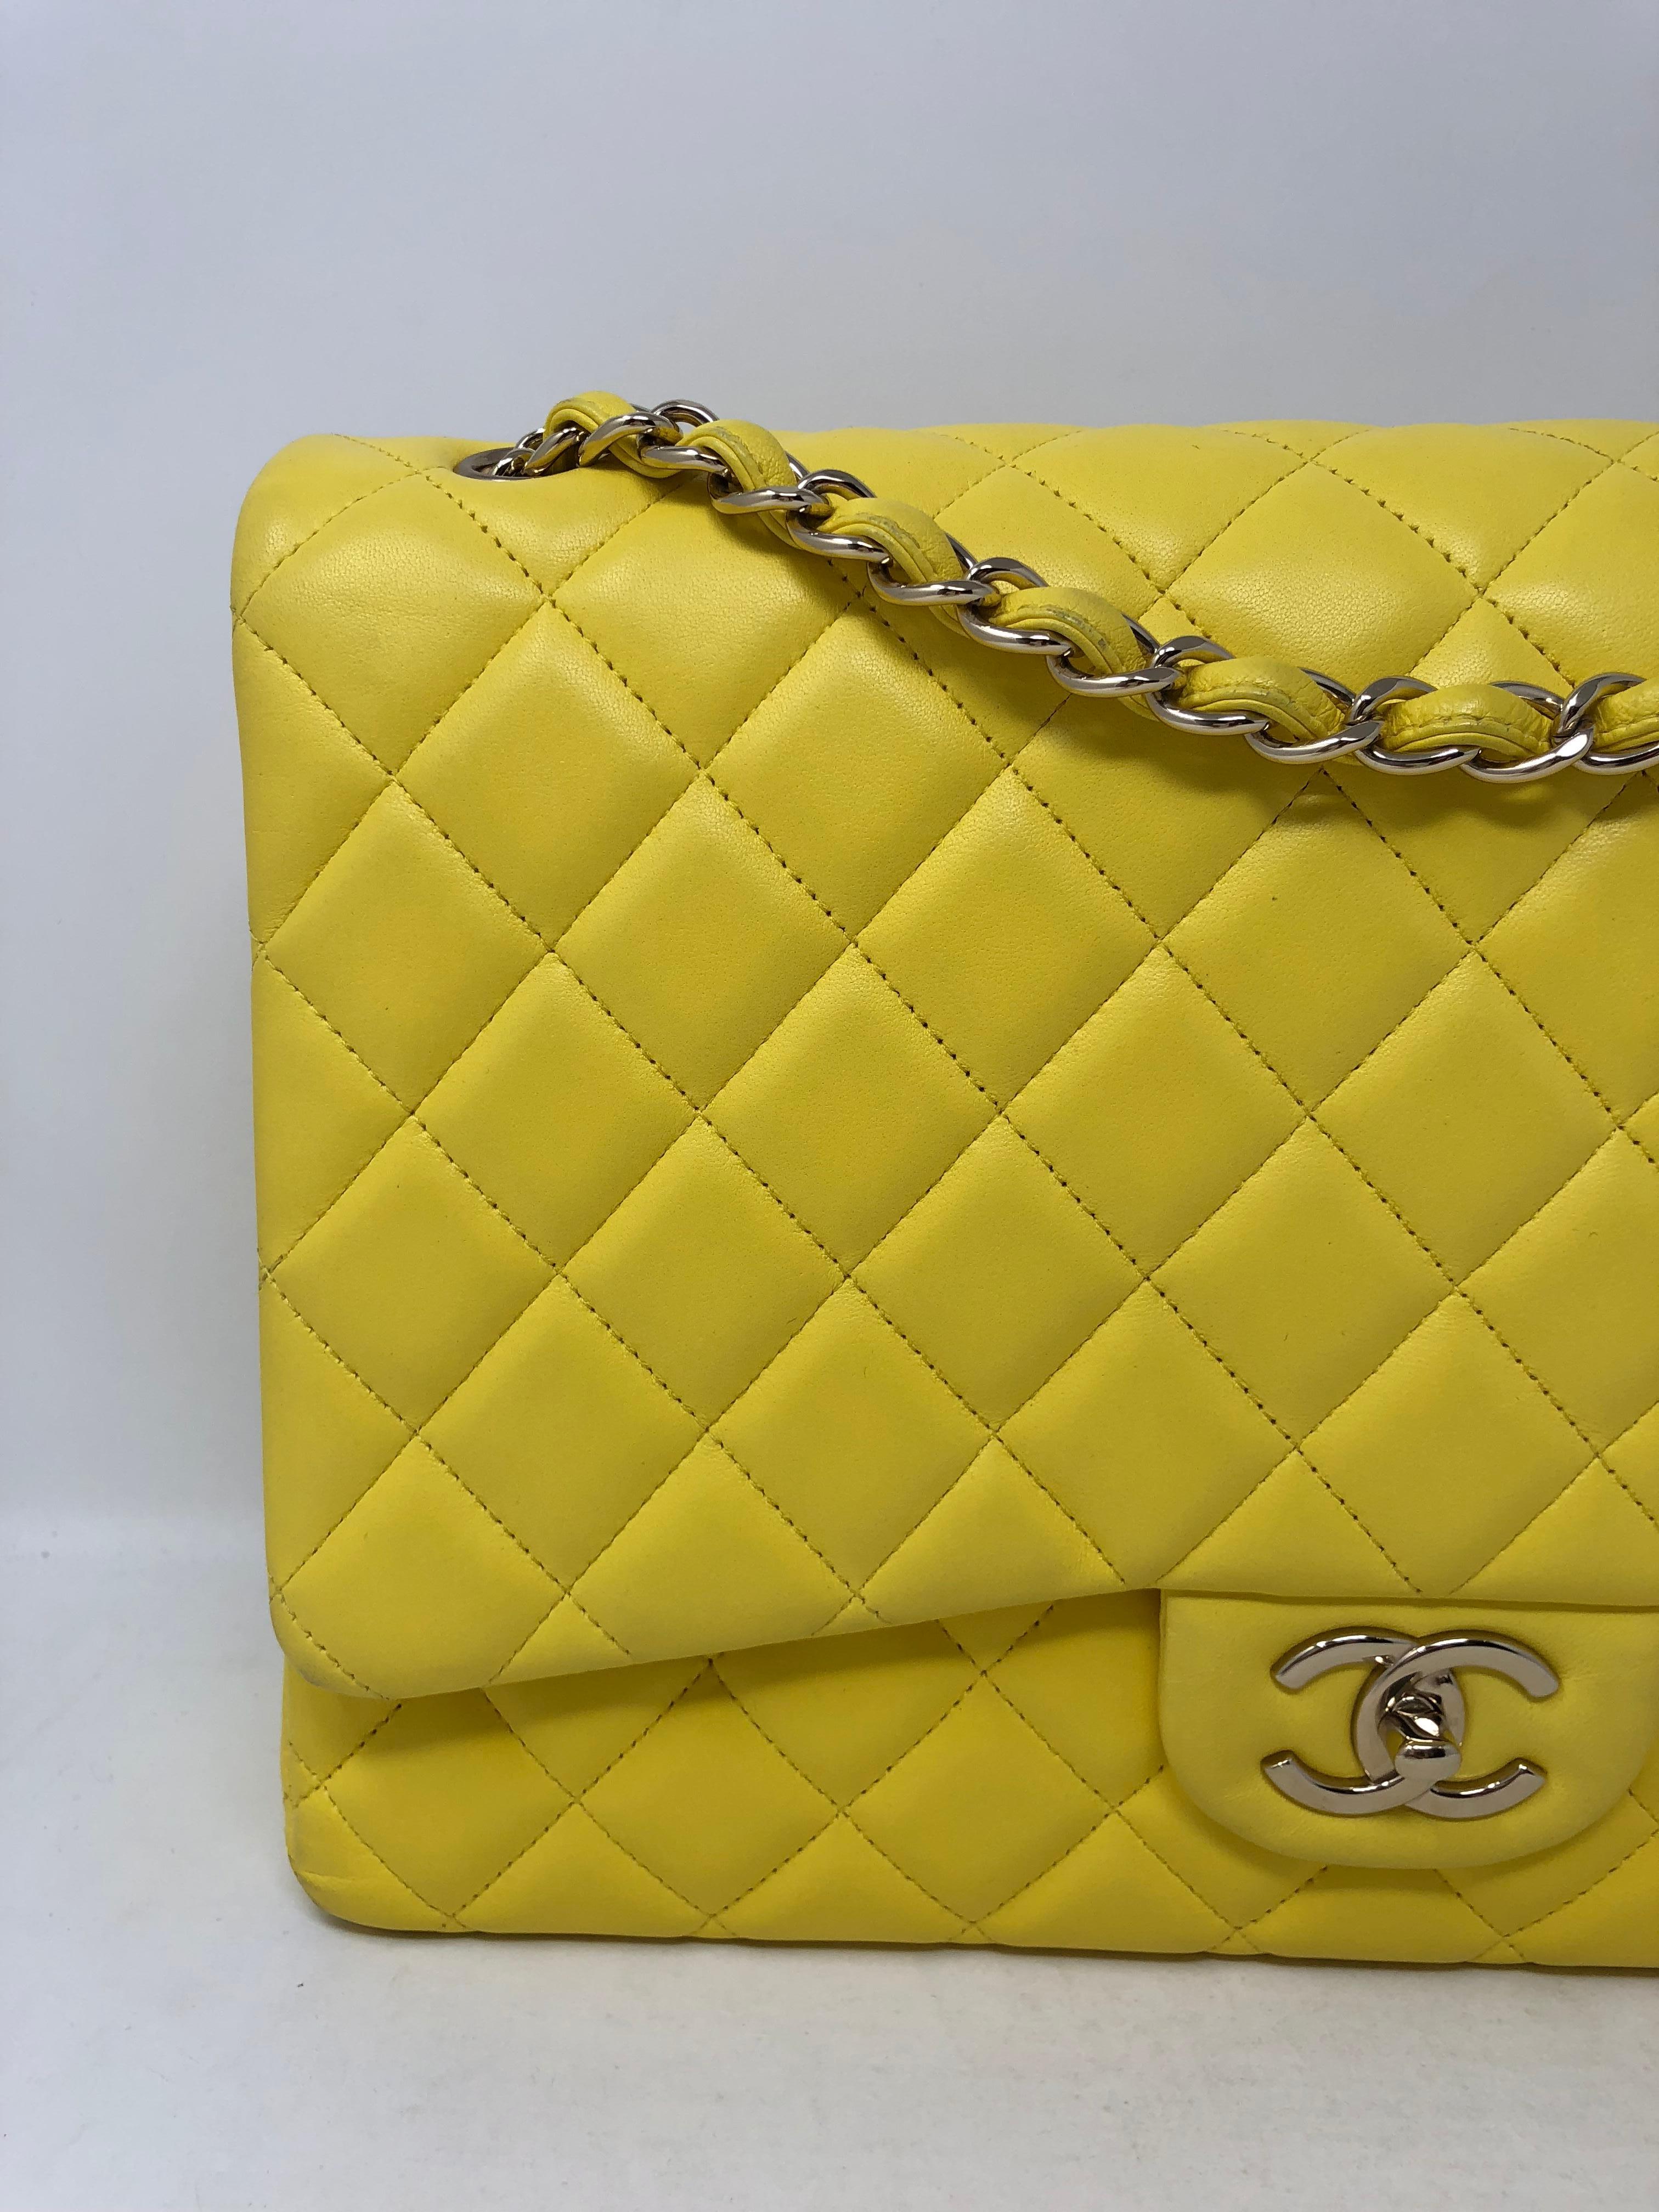 Chanel Canary Yellow Maxi Double Flap lambskin Bag with silver hardware. Bright yellow and good condition bag that can also be worn crossbody. Or doubled to wear as a shoulder bag. Stunning color and all leather. Add this to your Chanel collection.